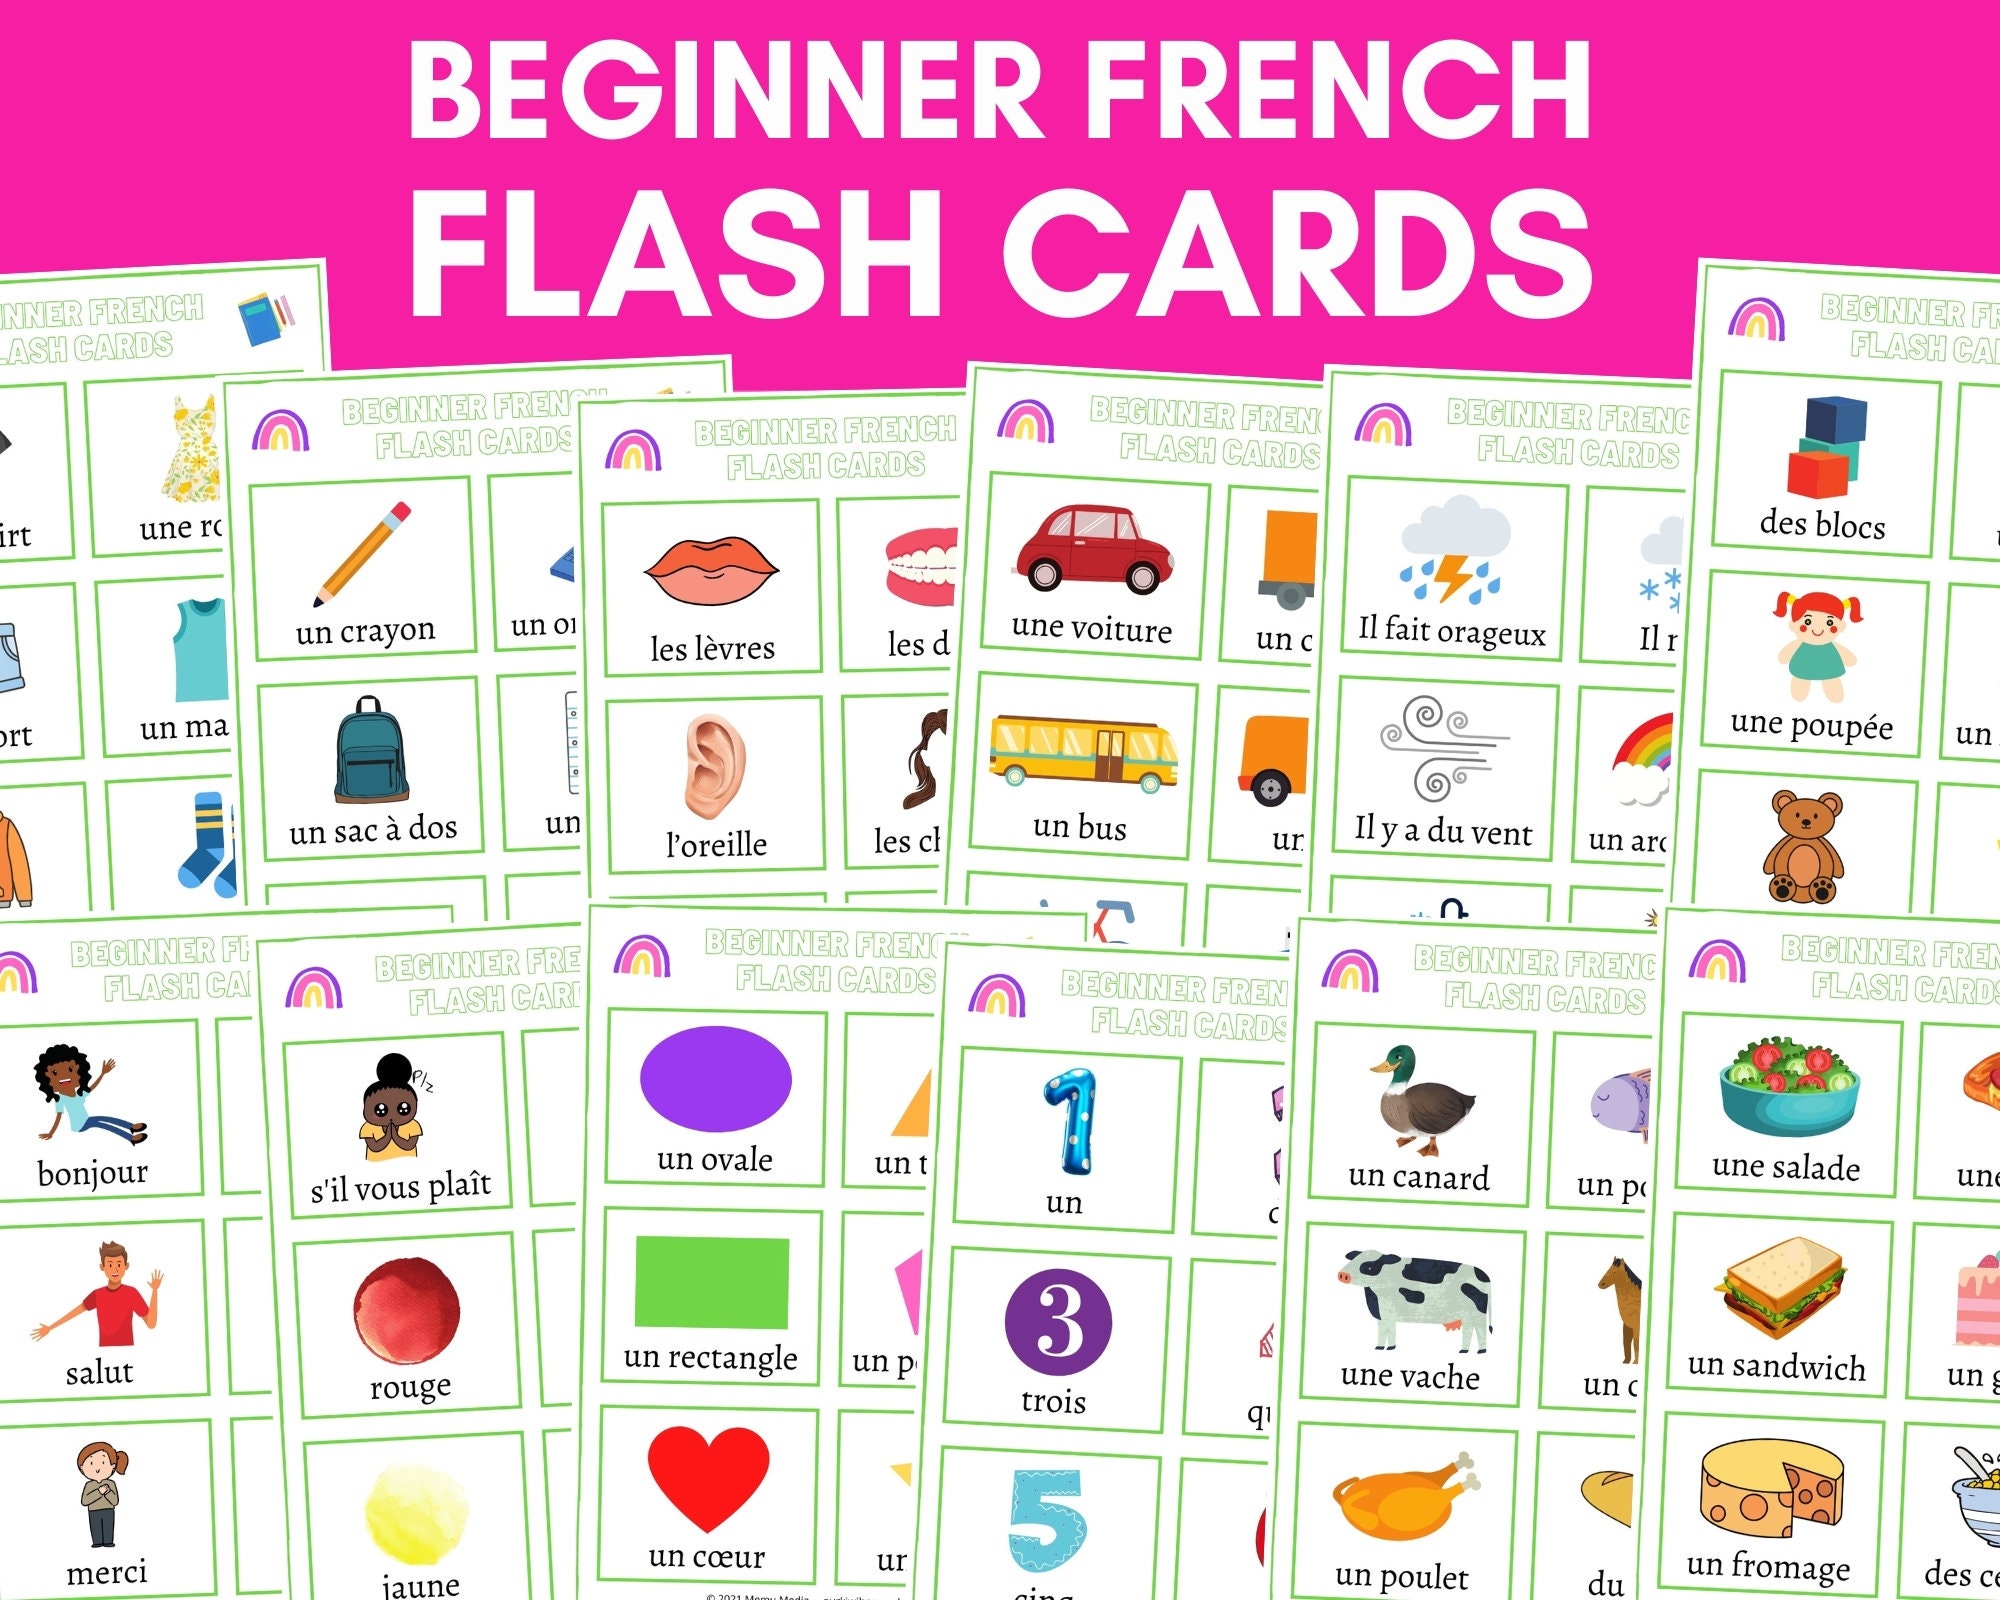 French Vocabulary Flash Cards for Language Learning eeBoo for Kids 4+